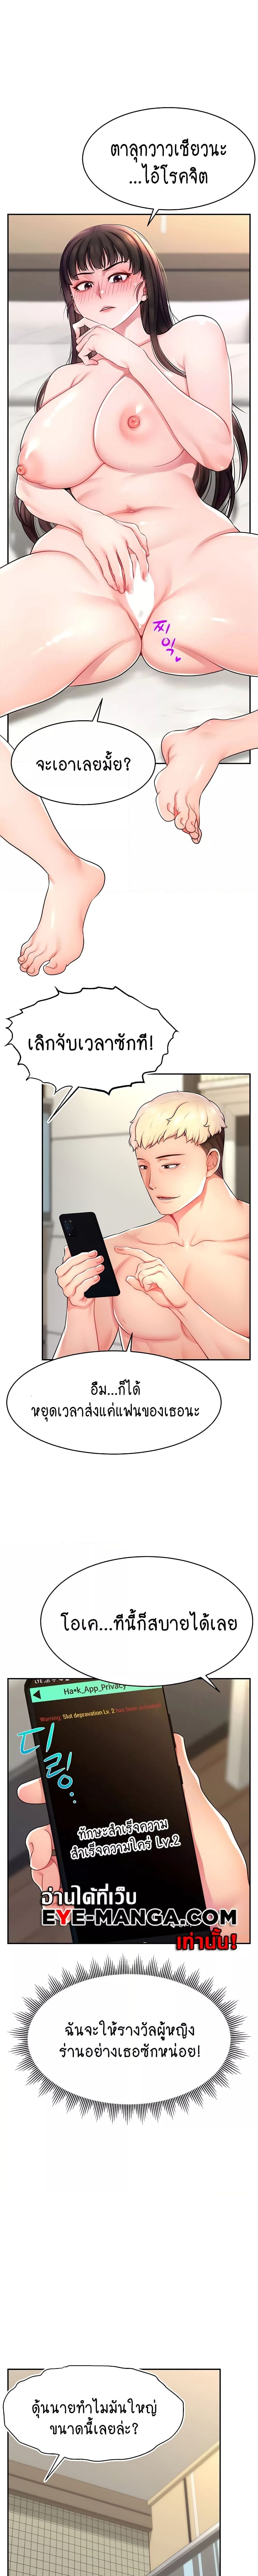 Making Friends With Streamers by Hacking! ตอนที่ 11 ภาพ 9